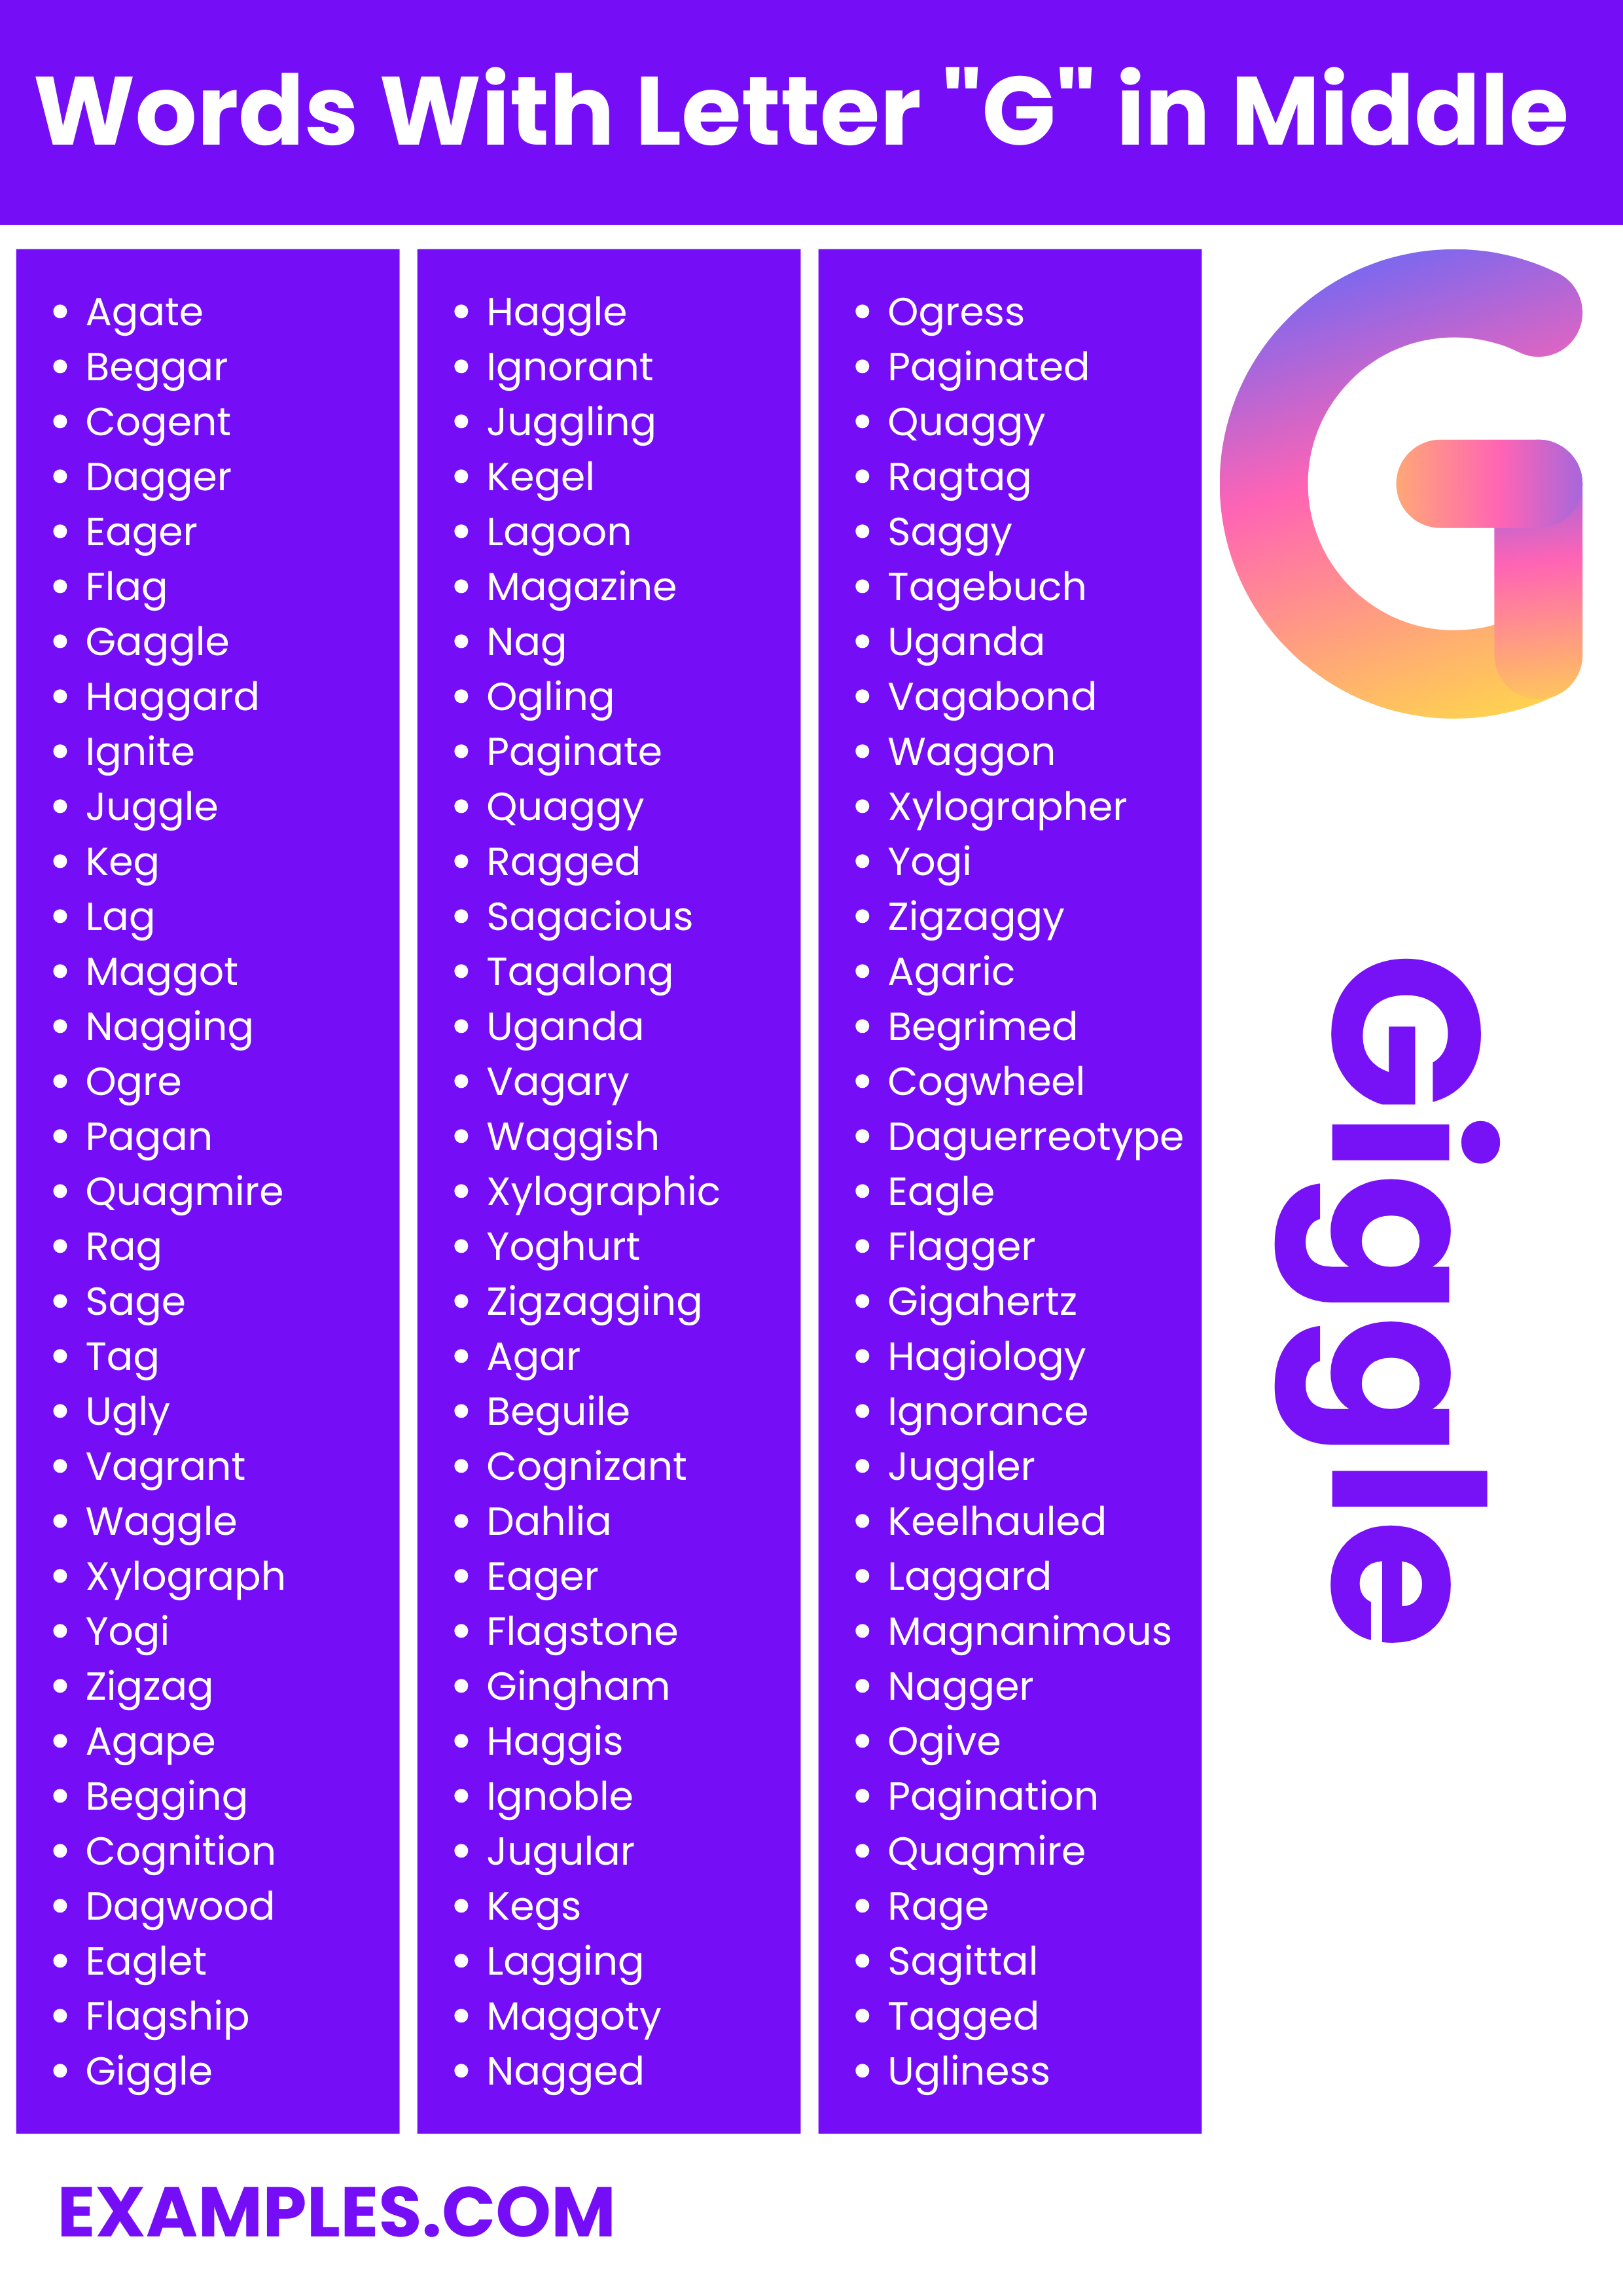 commonly used words with letter g in middle